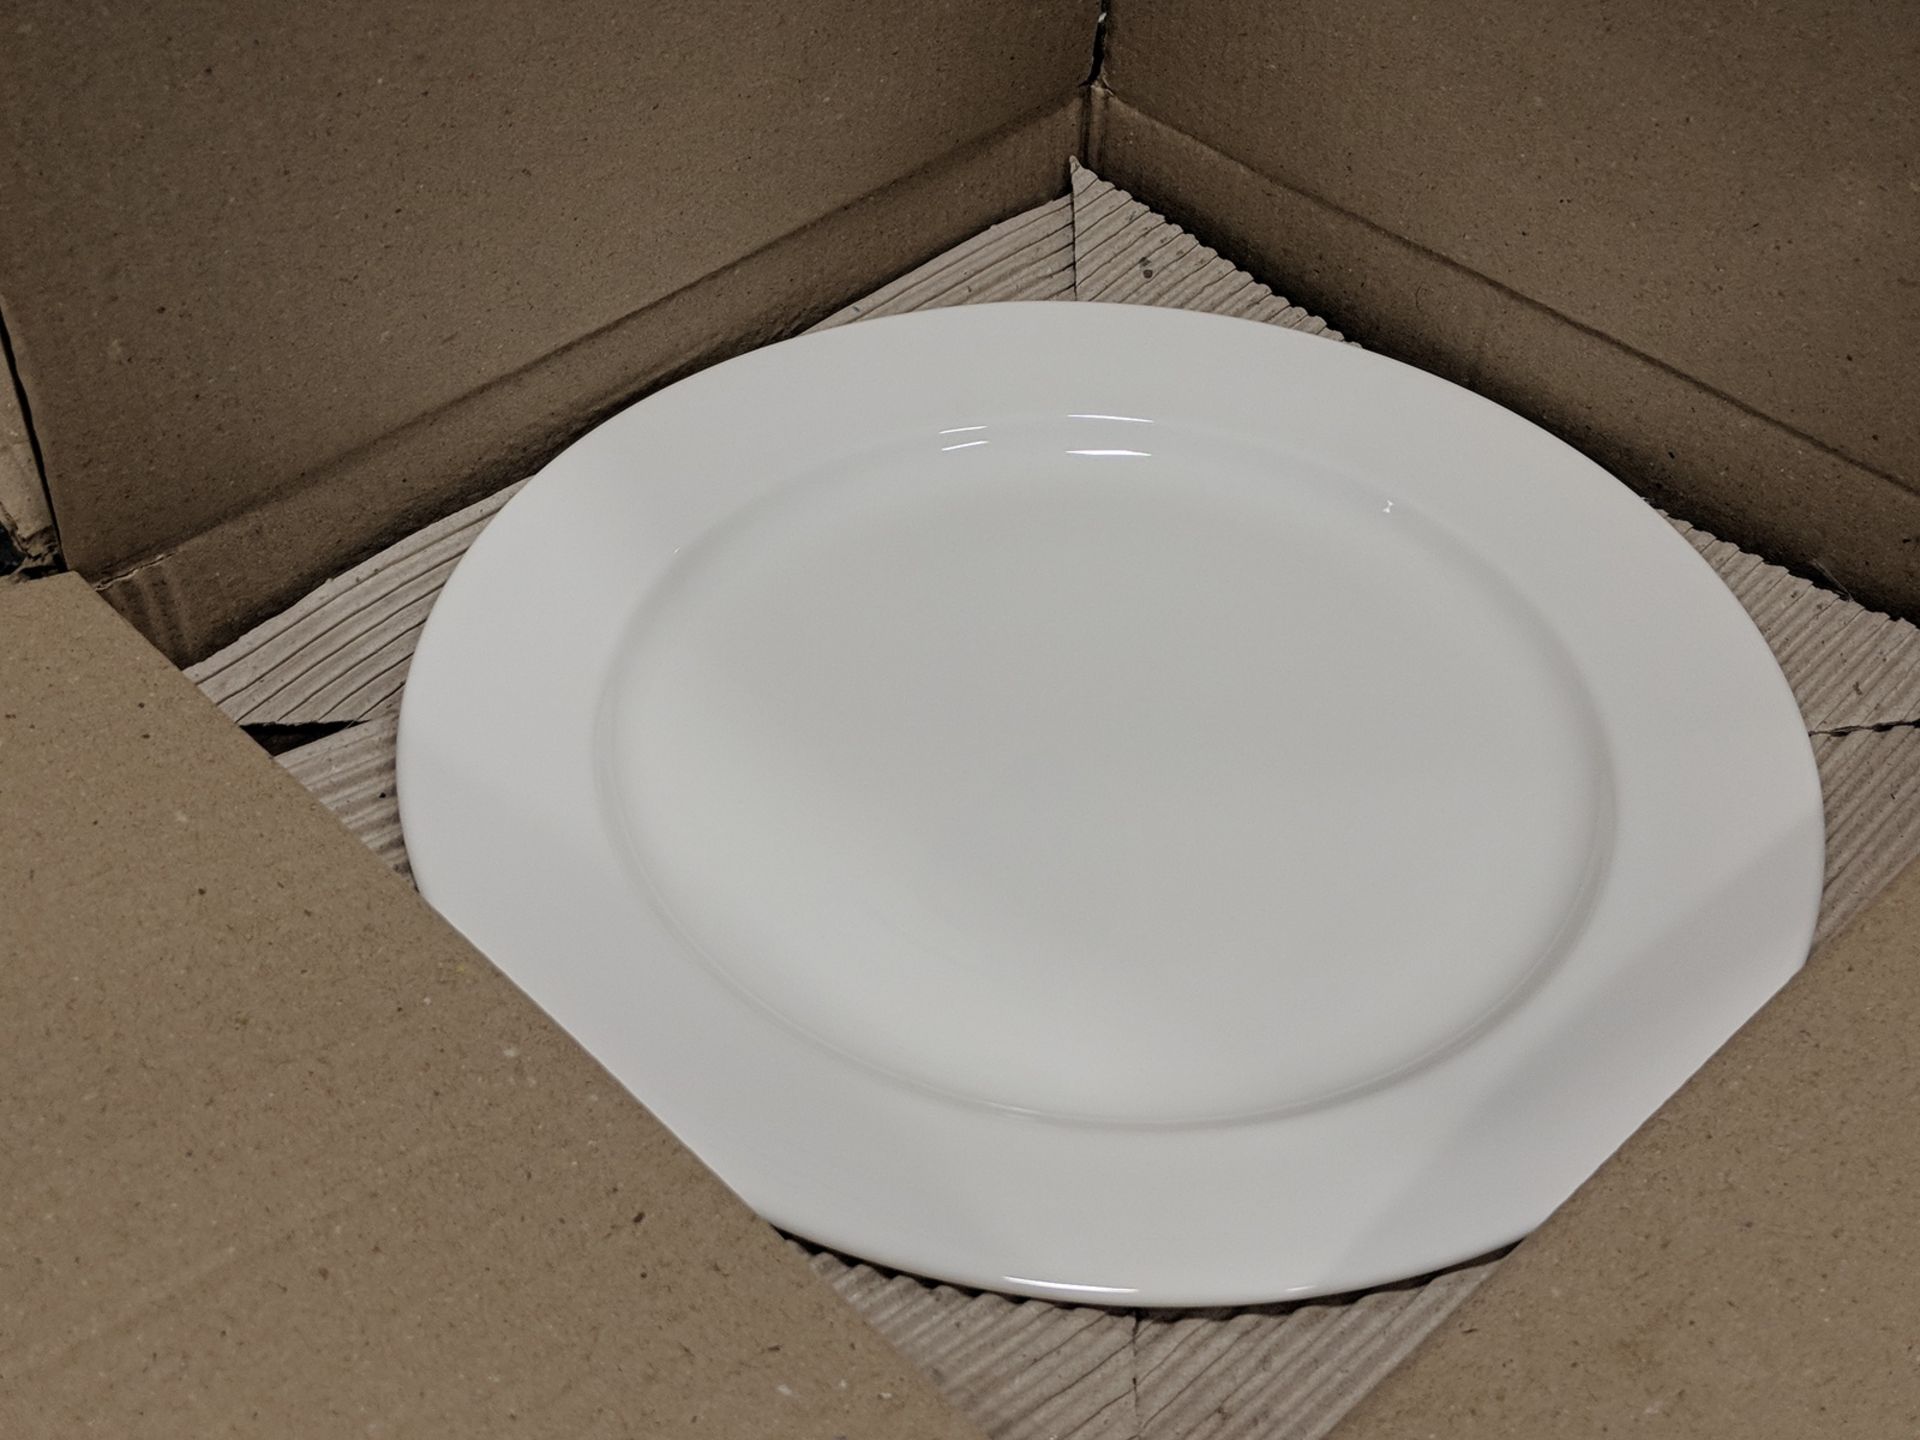 11-7/8" Infinity Service Plates - Lot of 12 (1 Case), Arcoroc R1001 - Image 2 of 6